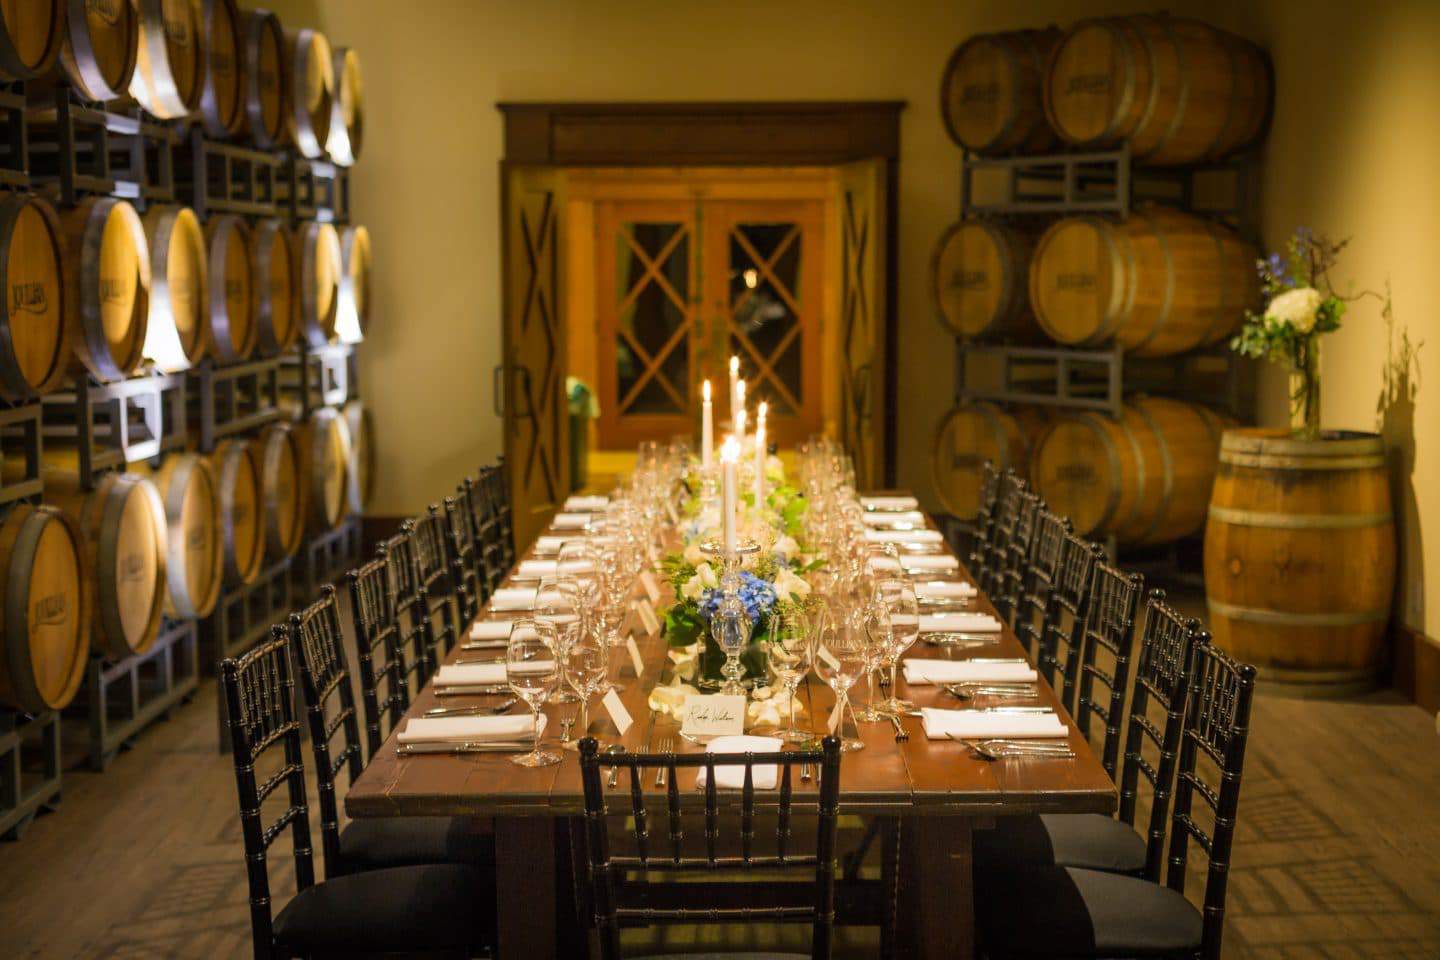 The Barrel Room at the Tasting Room